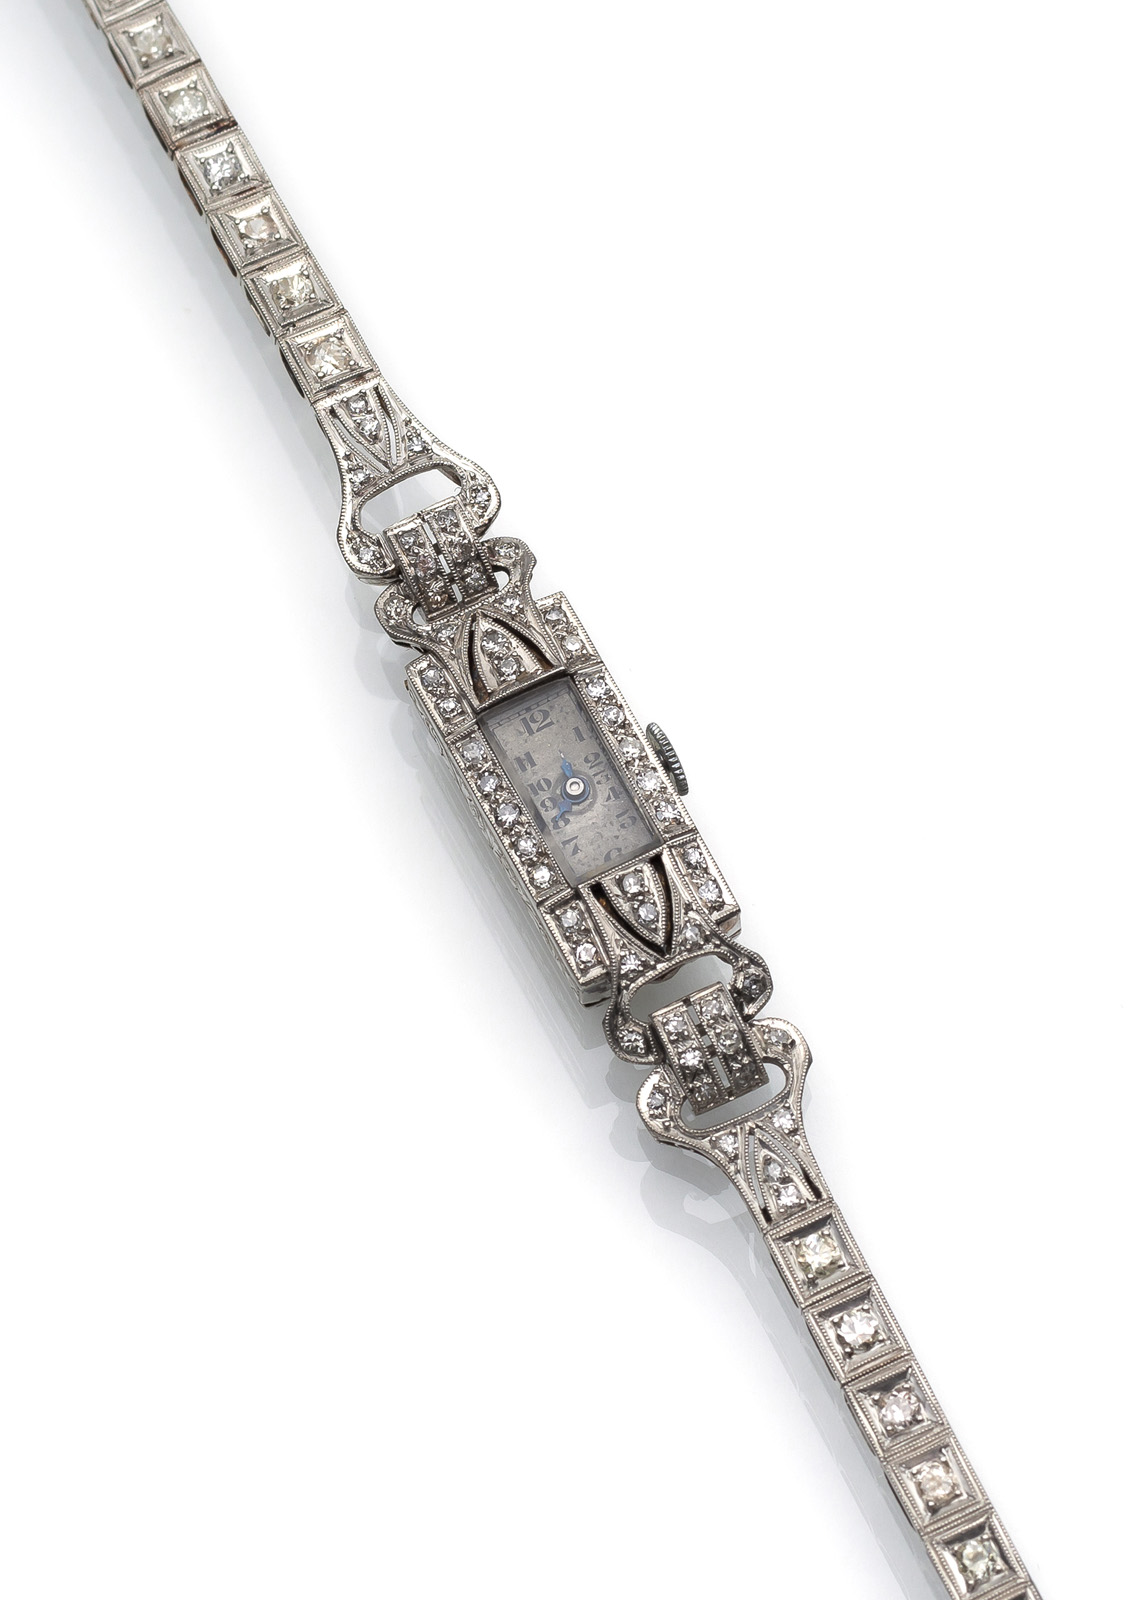 AN ART-DECO DIAMOND AND PLATINUM LADY'S WHRIST WATCH - Image 2 of 2